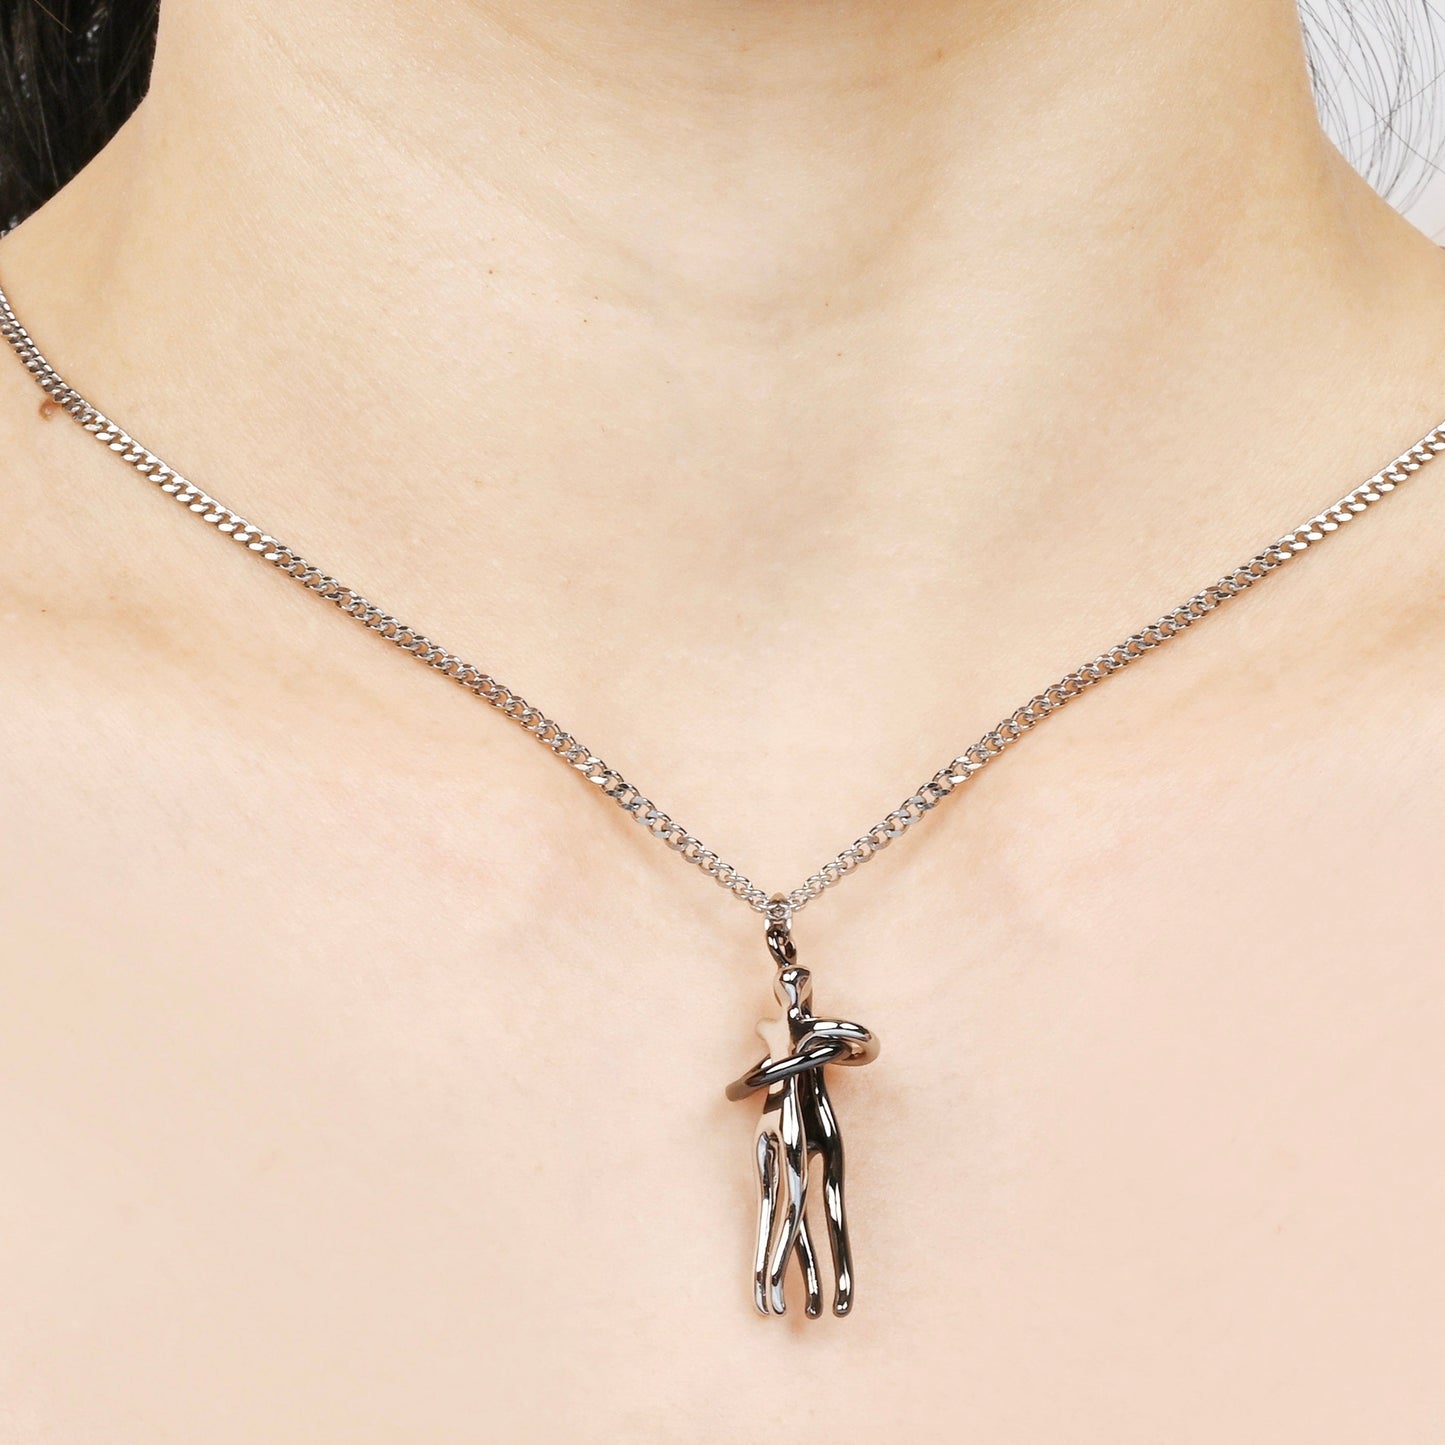 Embrace Charm Necklace – Warmth in Jewelry